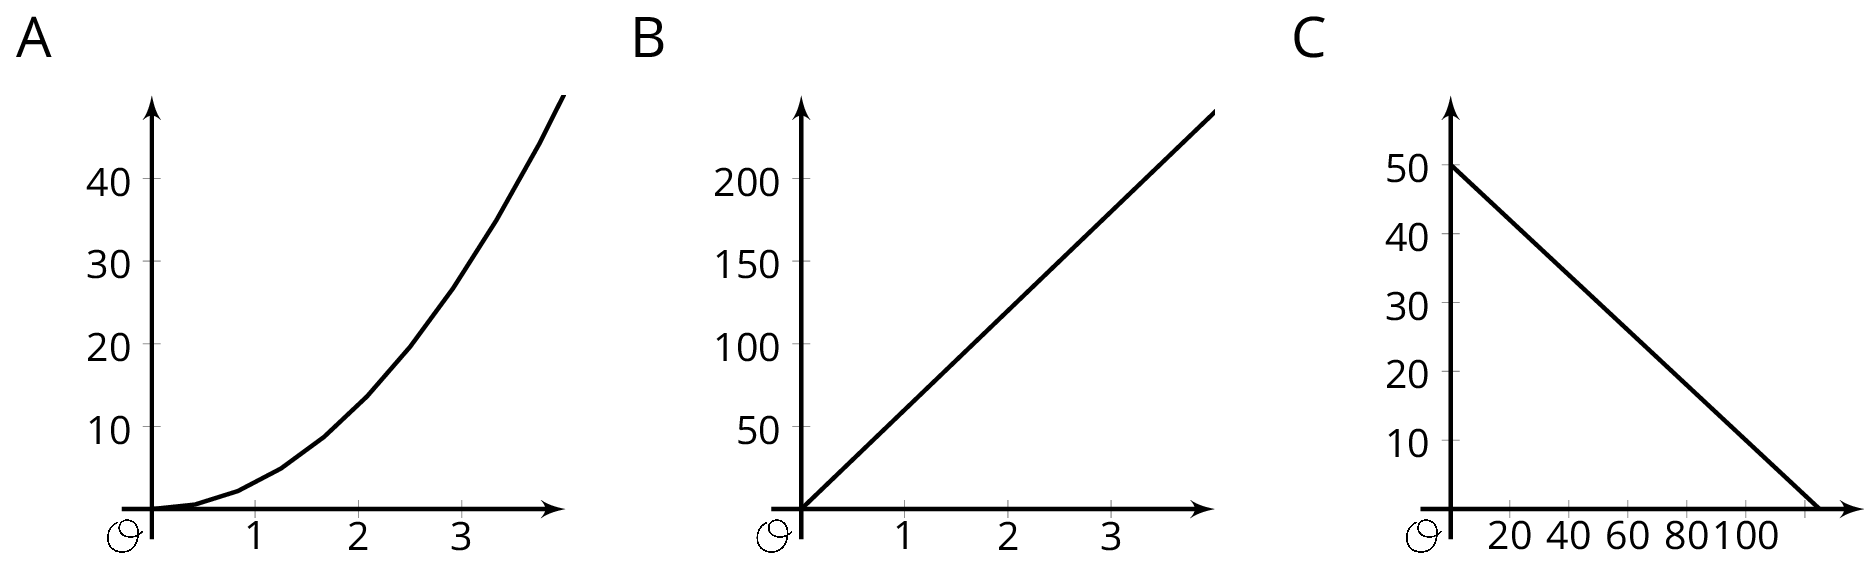 The graphs of three functions on the coordinate plane labeled A, B, and C. Graph A is the graph of a curve with the origin labeled O. The horizontal axis has the numbers 1 through 3 indicated and the vertical axis has the numbers 10 through 40, in increments of 10, indicated. The curve begins at the origin, extends to the right, and then extends upward and to the right. Graph B is the graph of a line with the origin labeled O. The horizontal axis has the numbers 1 through 3 indicated and the vertical axis has the numbers 50 through 200, in increments of 50, indicated. The line begins at the origin and slants upward and to the right. Graph C is the graph of a line with the origin labeled O. The horizontal axis has the nubers 20 through 100, in increments of 20, indicated and the vertical axis has the numbers 10 through 50, in increments 10, indicated. The line begins on the vertical axis at 50 and slants downward and to the right.